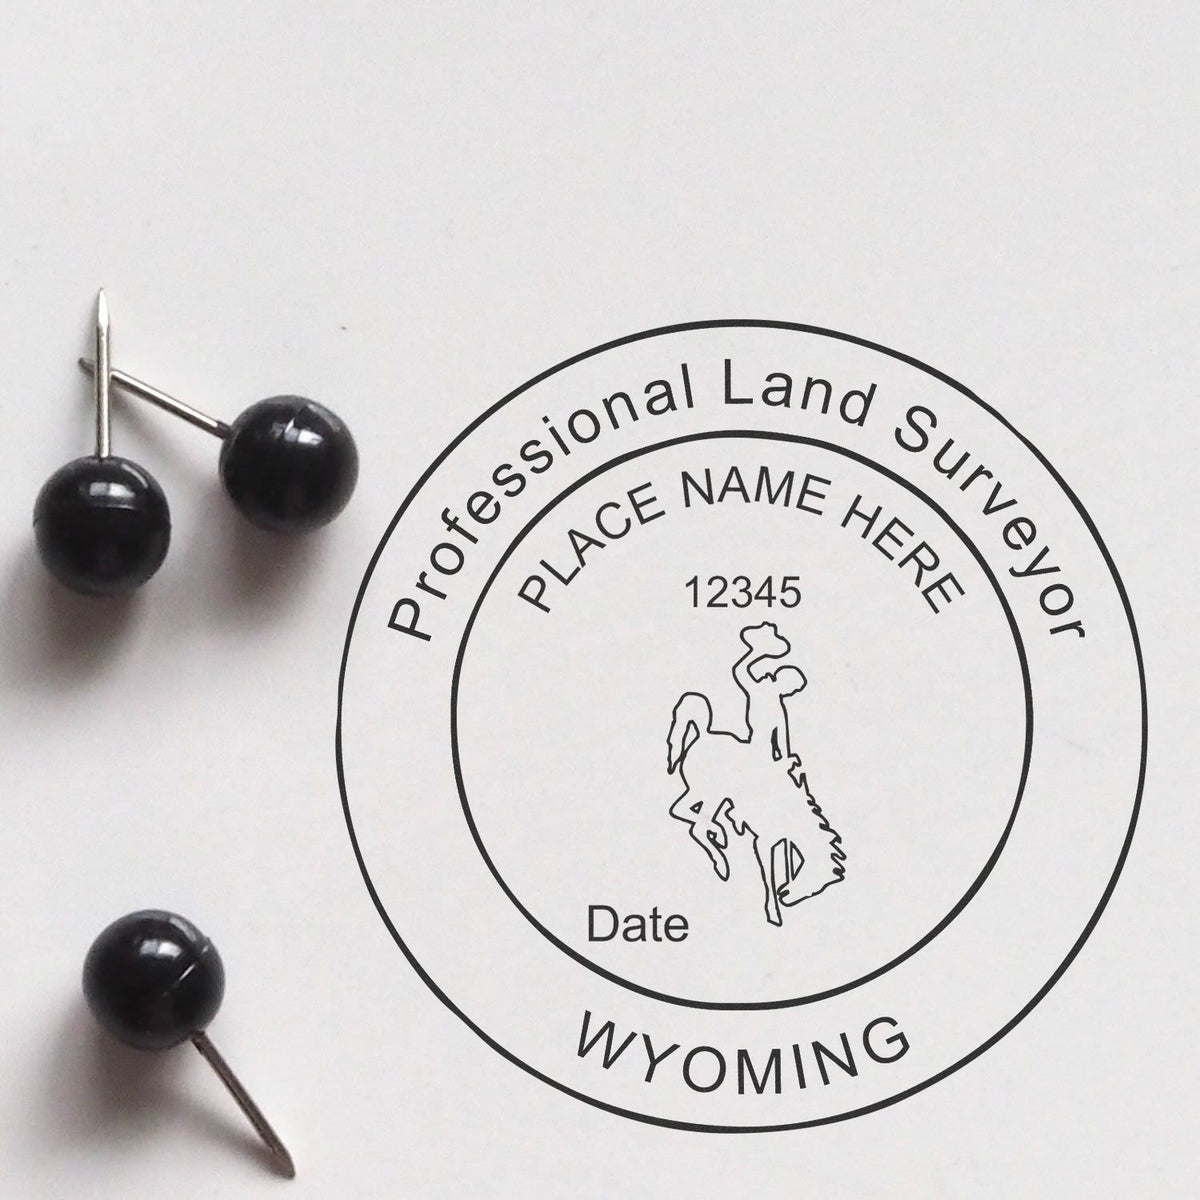 An alternative view of the Slim Pre-Inked Wyoming Land Surveyor Seal Stamp stamped on a sheet of paper showing the image in use